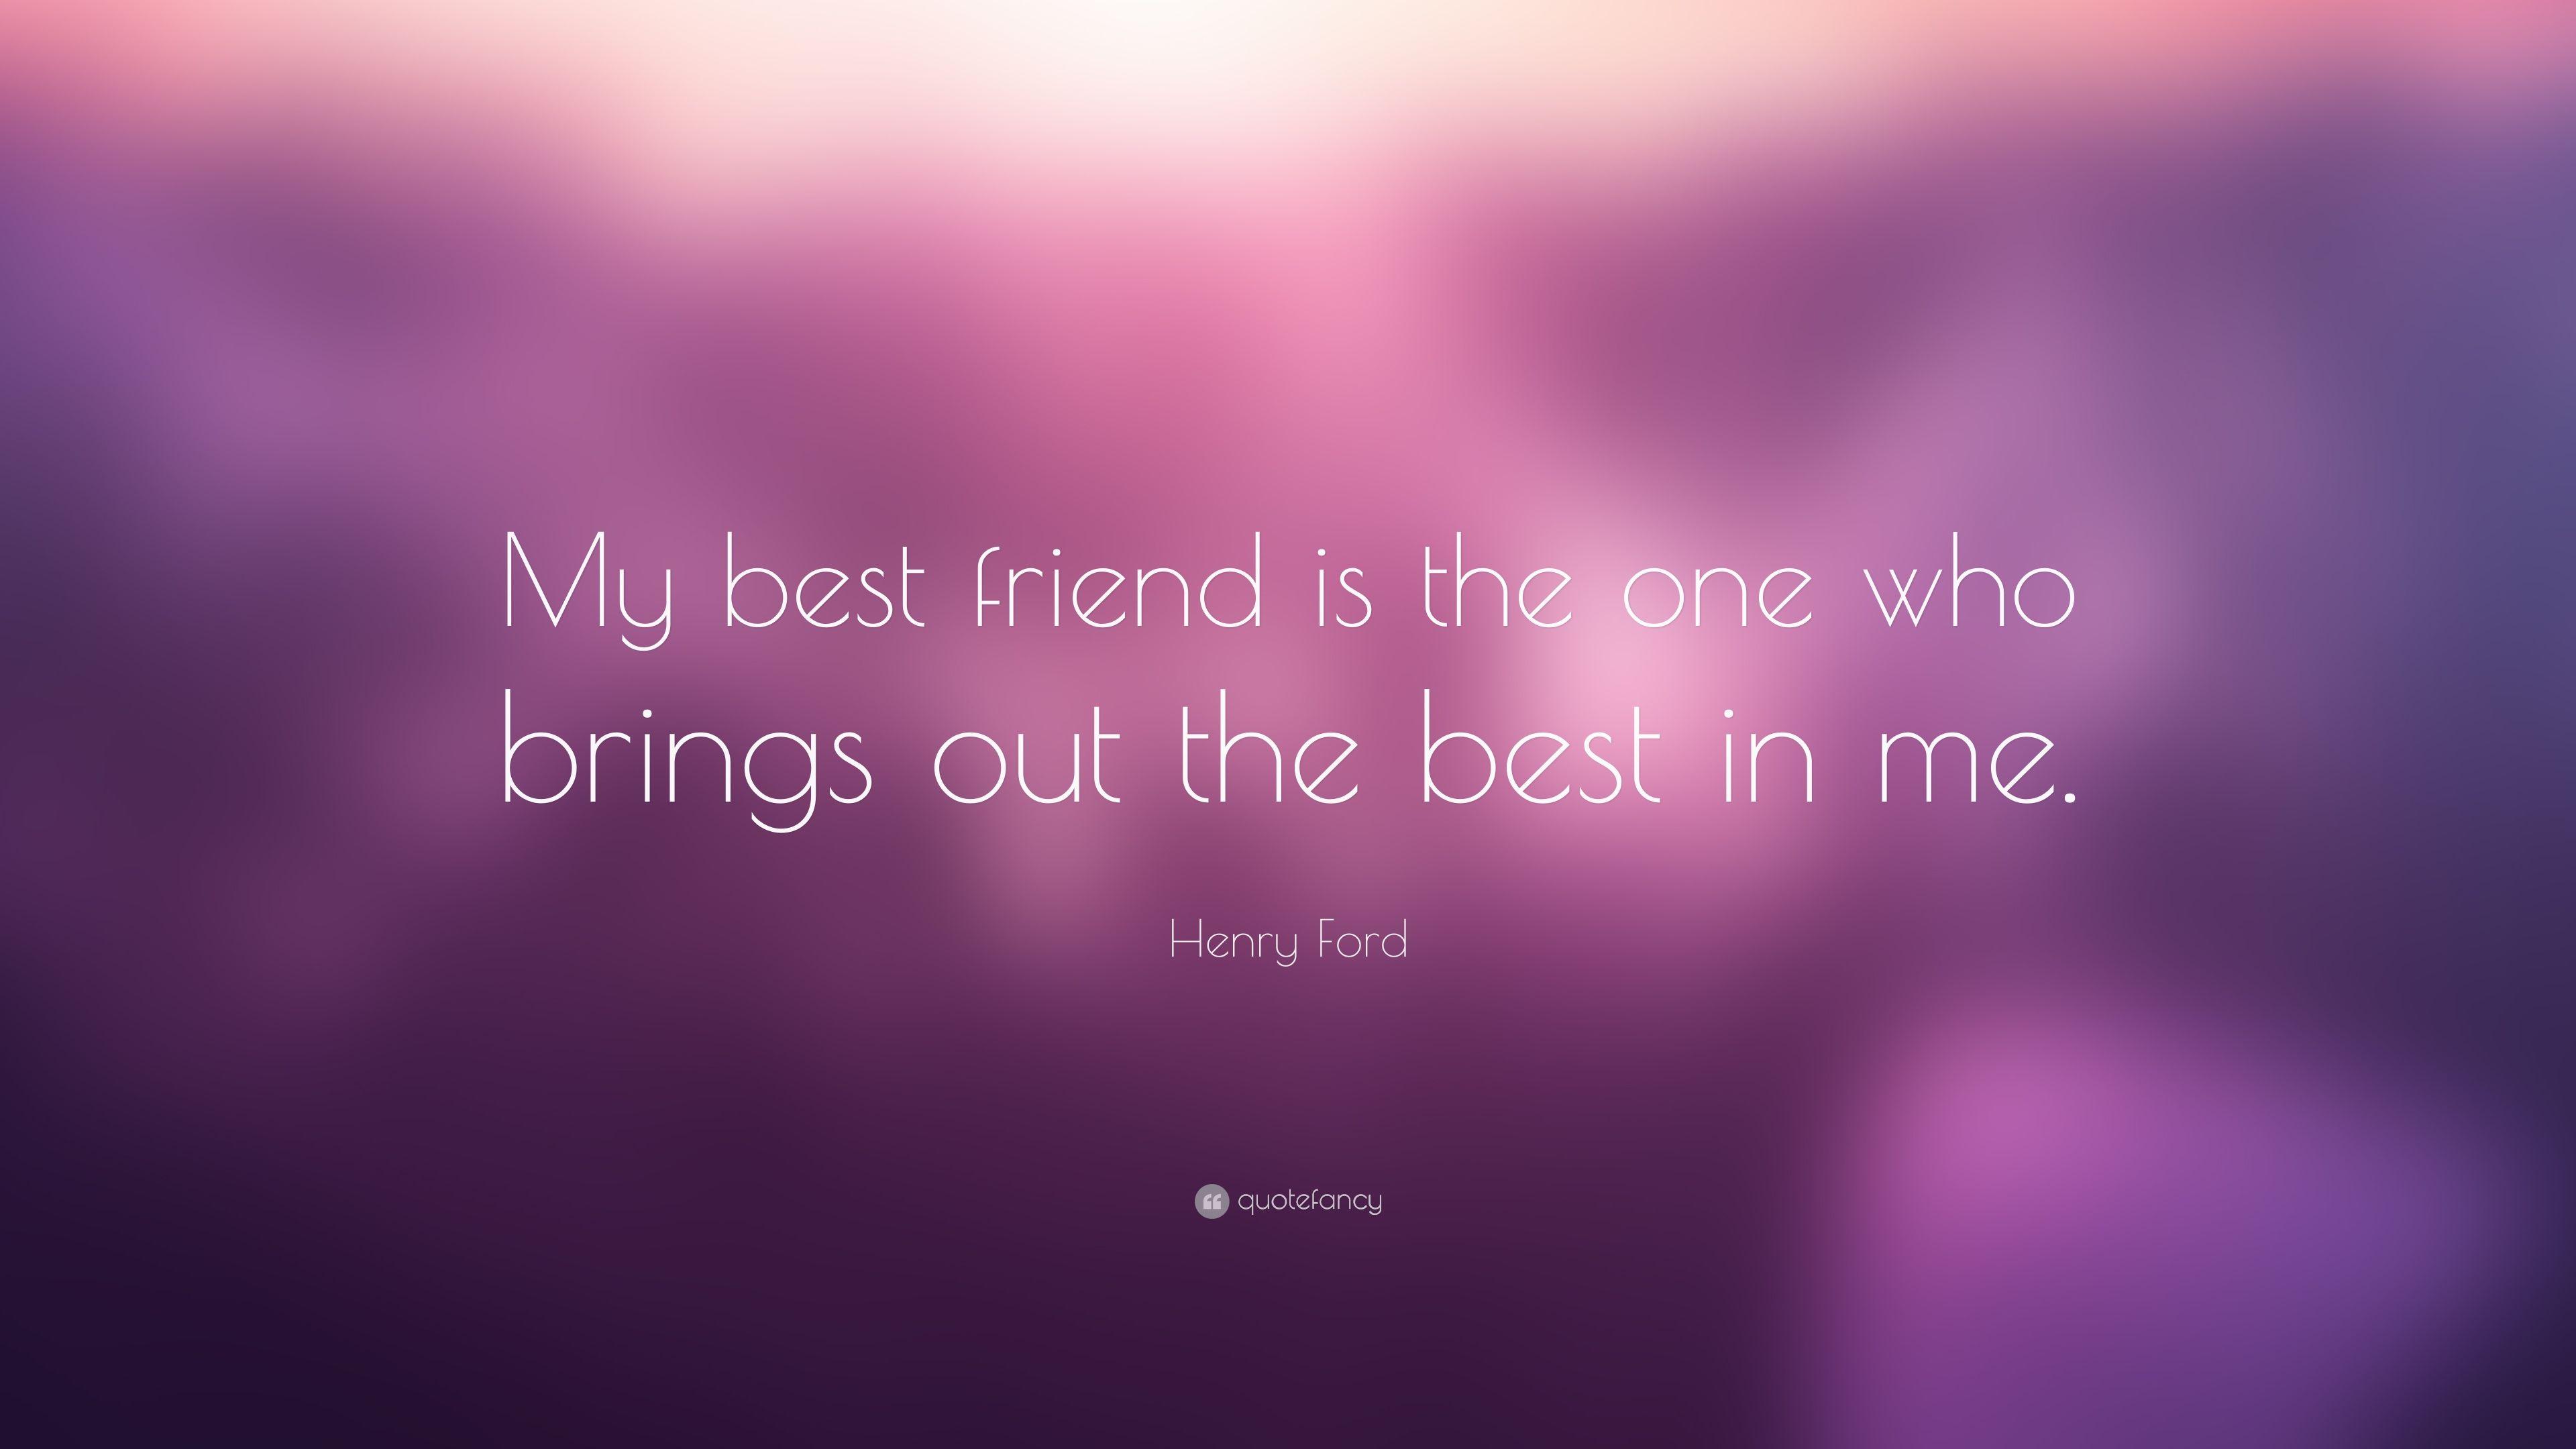 Henry Ford Quote: “My best friend is the one who brings out the best